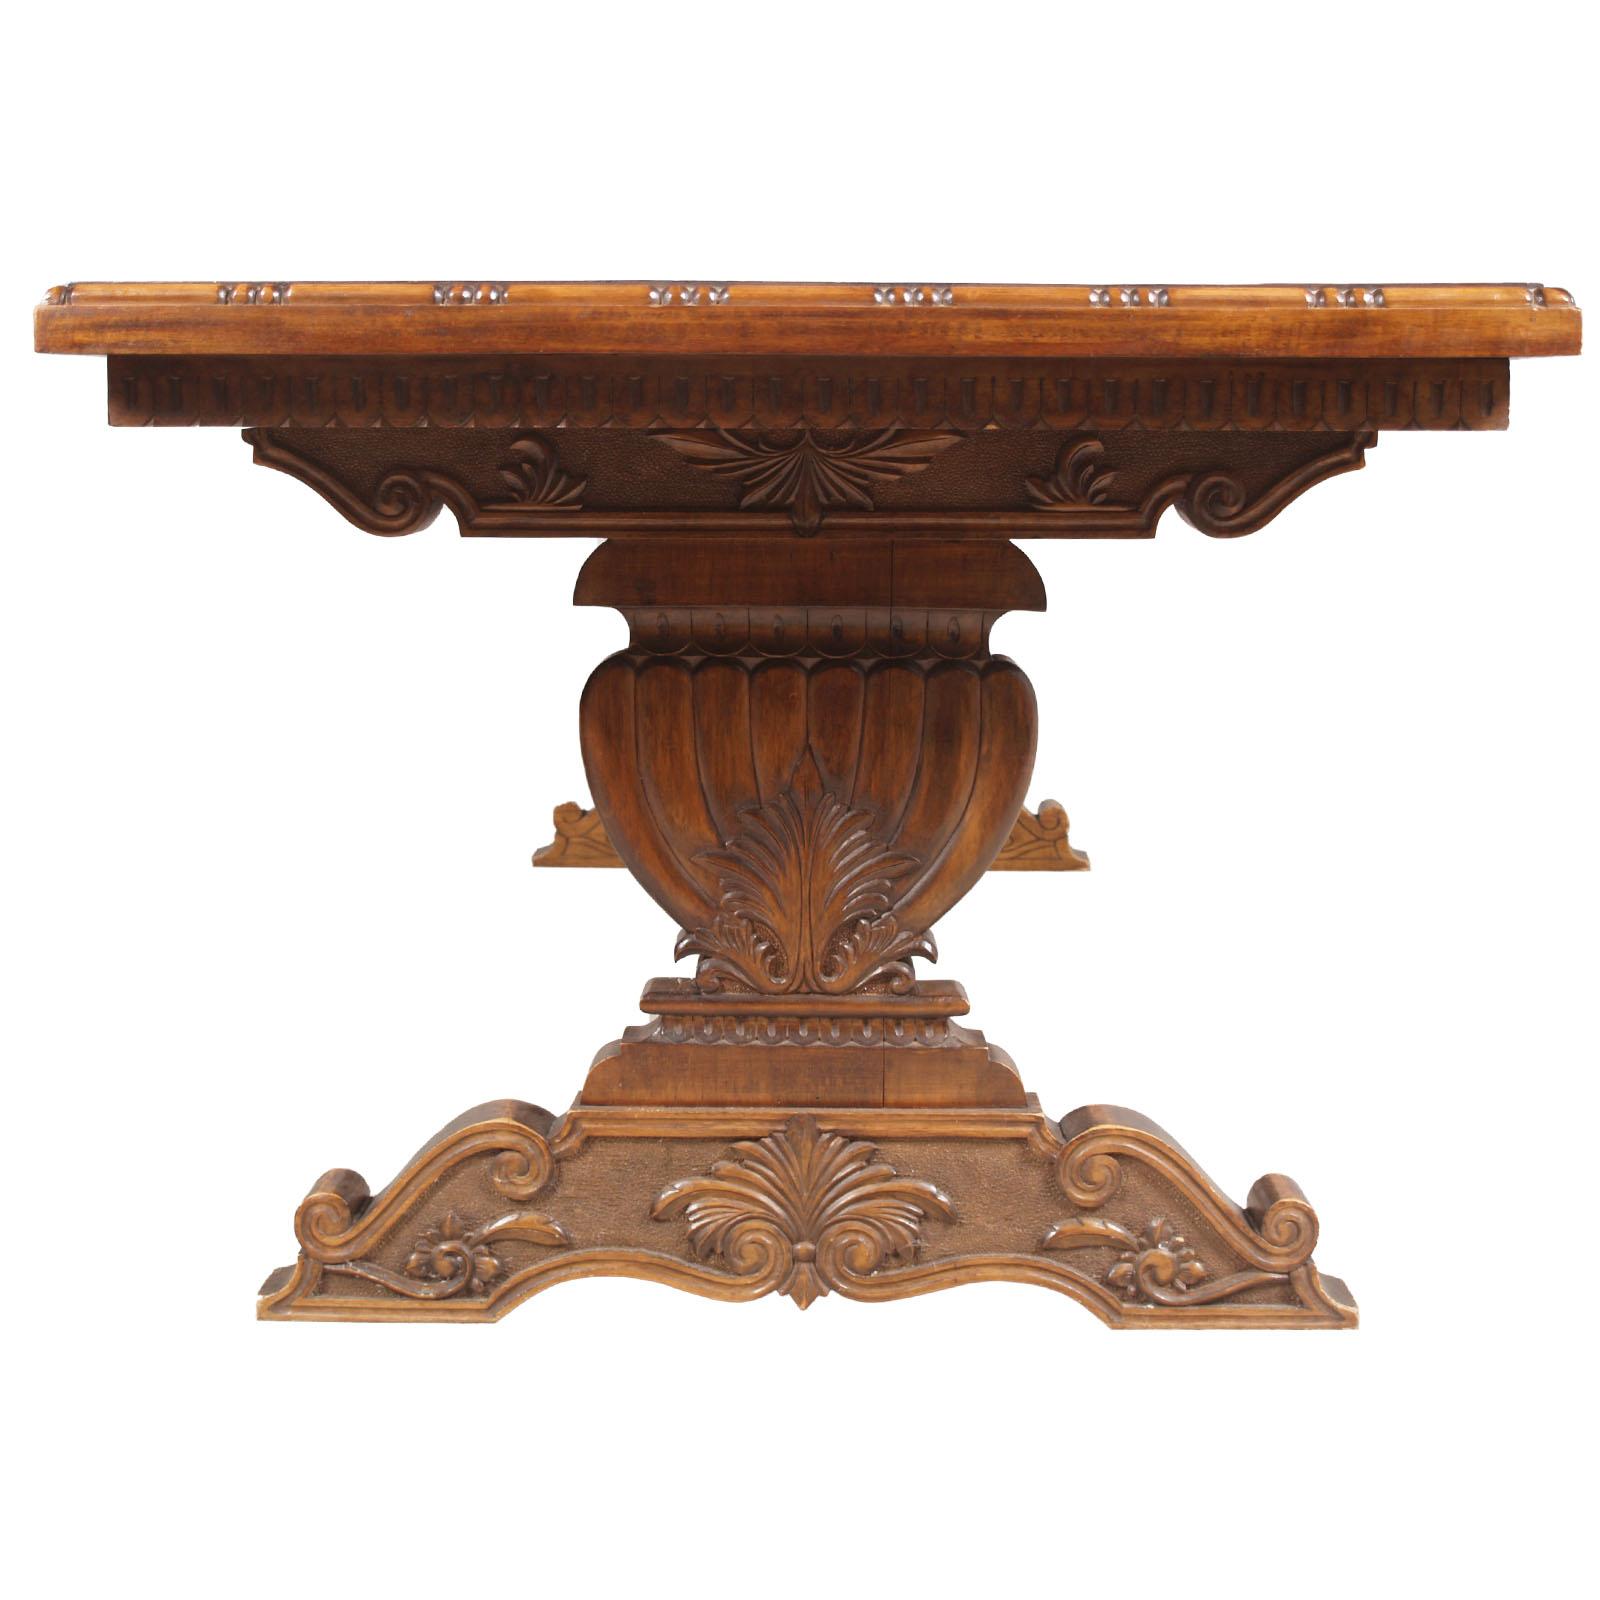 Antique important massive heavy Renaissance Dining Table in Hand Carved Solid Walnut, polished to wax , in excellent conditions, by Michele Bonciani , Cascina , Tuscany .

Measures table cm: H80 W240 D96.

ABOUT MICHELE BONCIANI
The Bonciani firm,